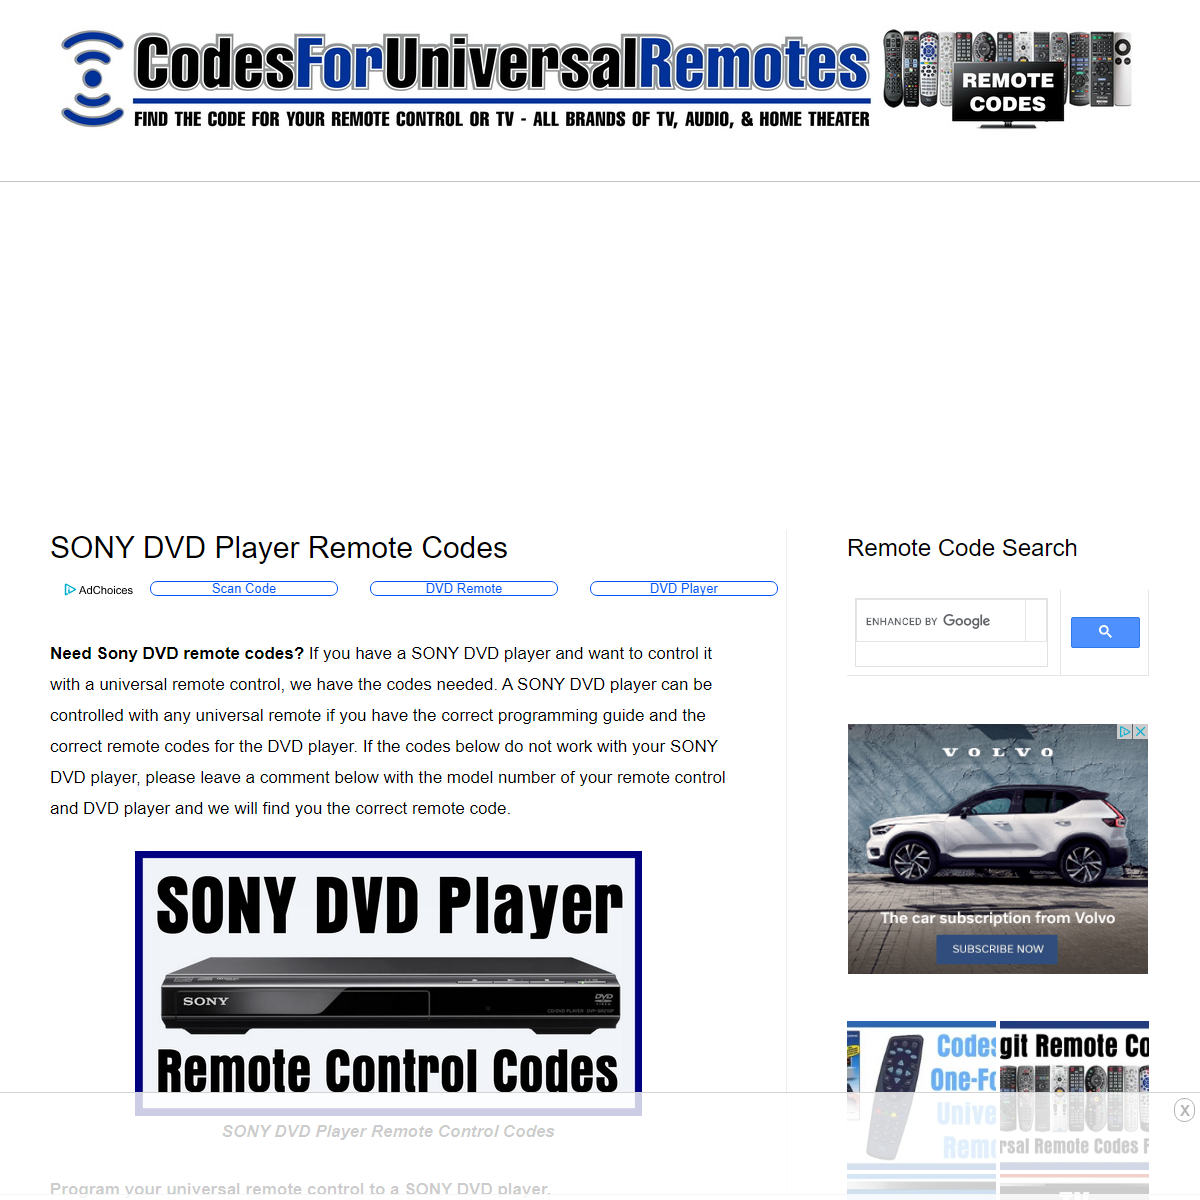 A complete backup of https://codesforuniversalremotes.com/remote-control-codes-for-sony-dvd-players/